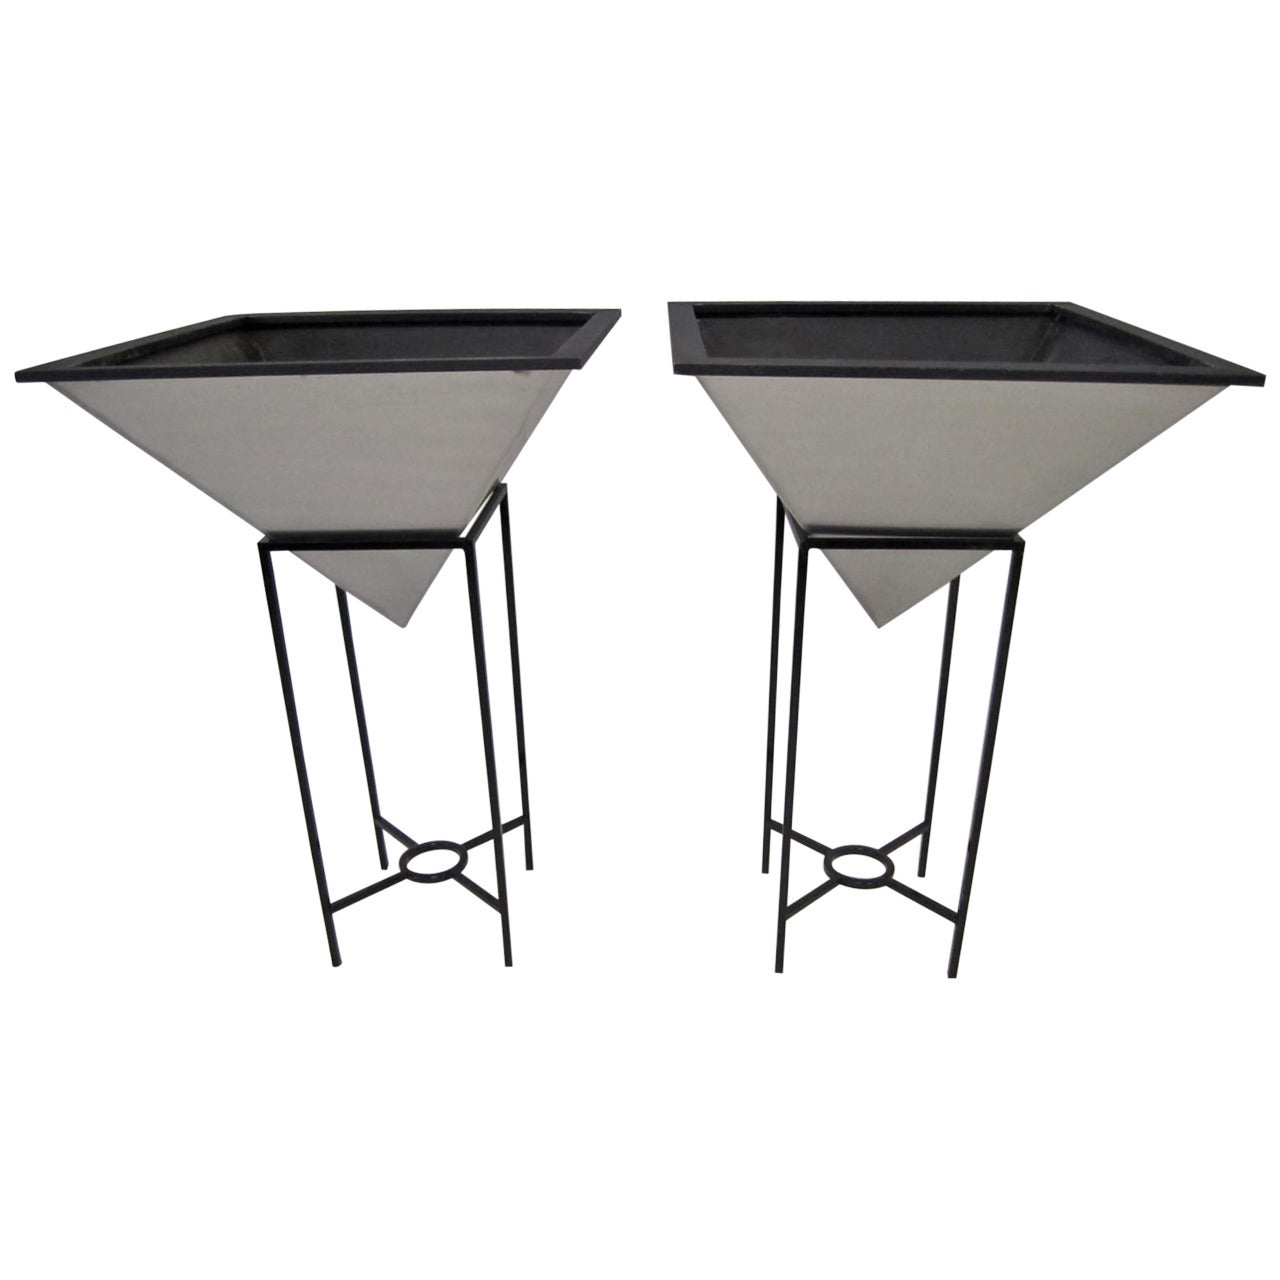 Oversized Inverted Pyramid Planters on Iron Stands Mid-Century Modern